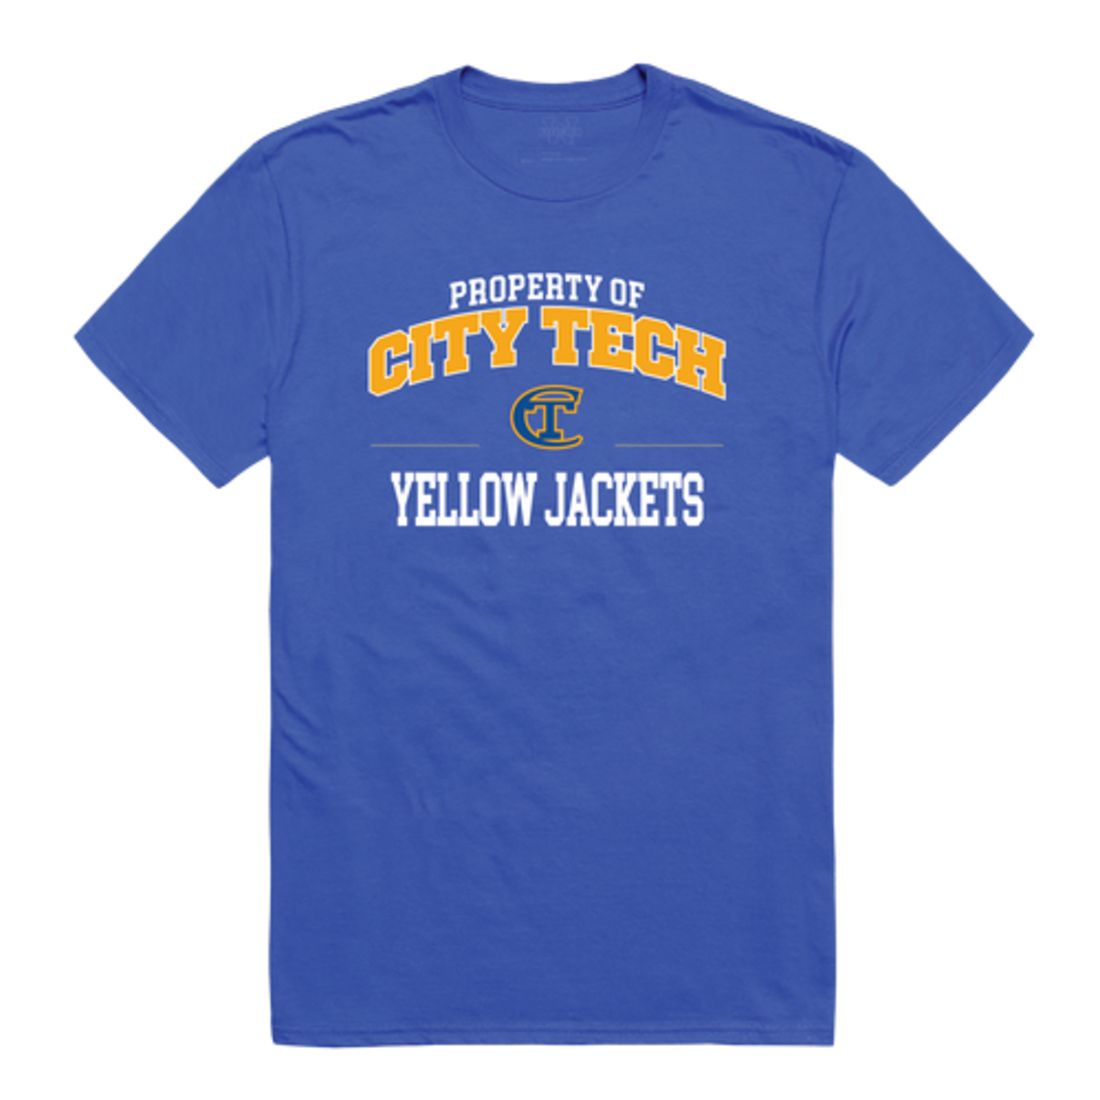 New York City College of Technology Yellow Jackets Property T-Shirt